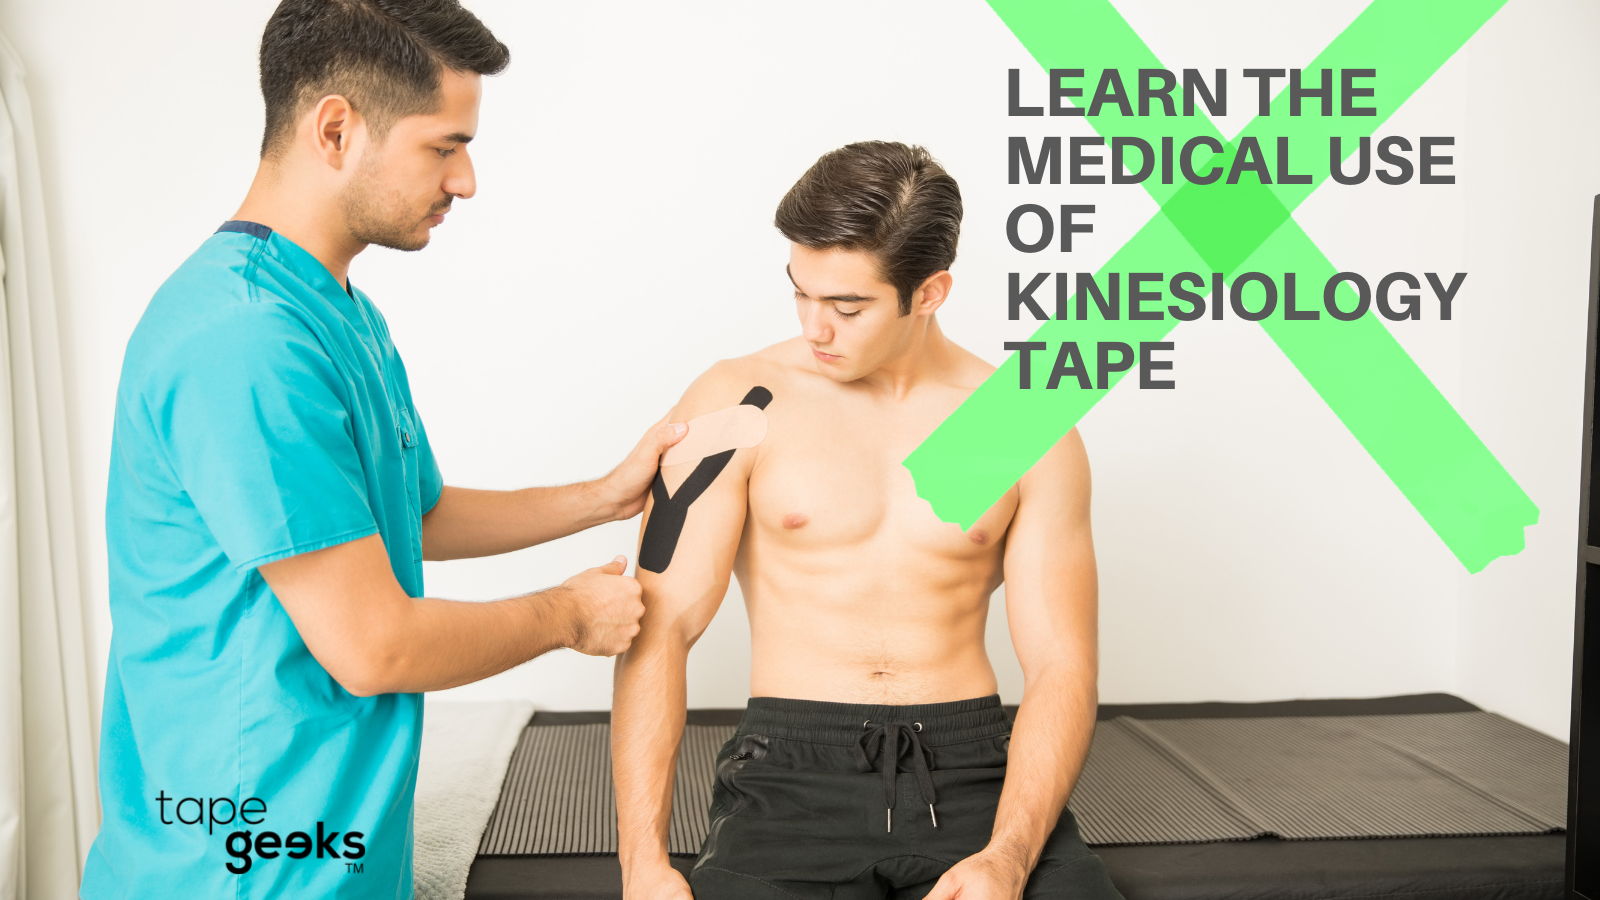 WHY YOU SHOULD USE KINESIOLOGY TAPE IN YOUR MEDICAL PRACTICE